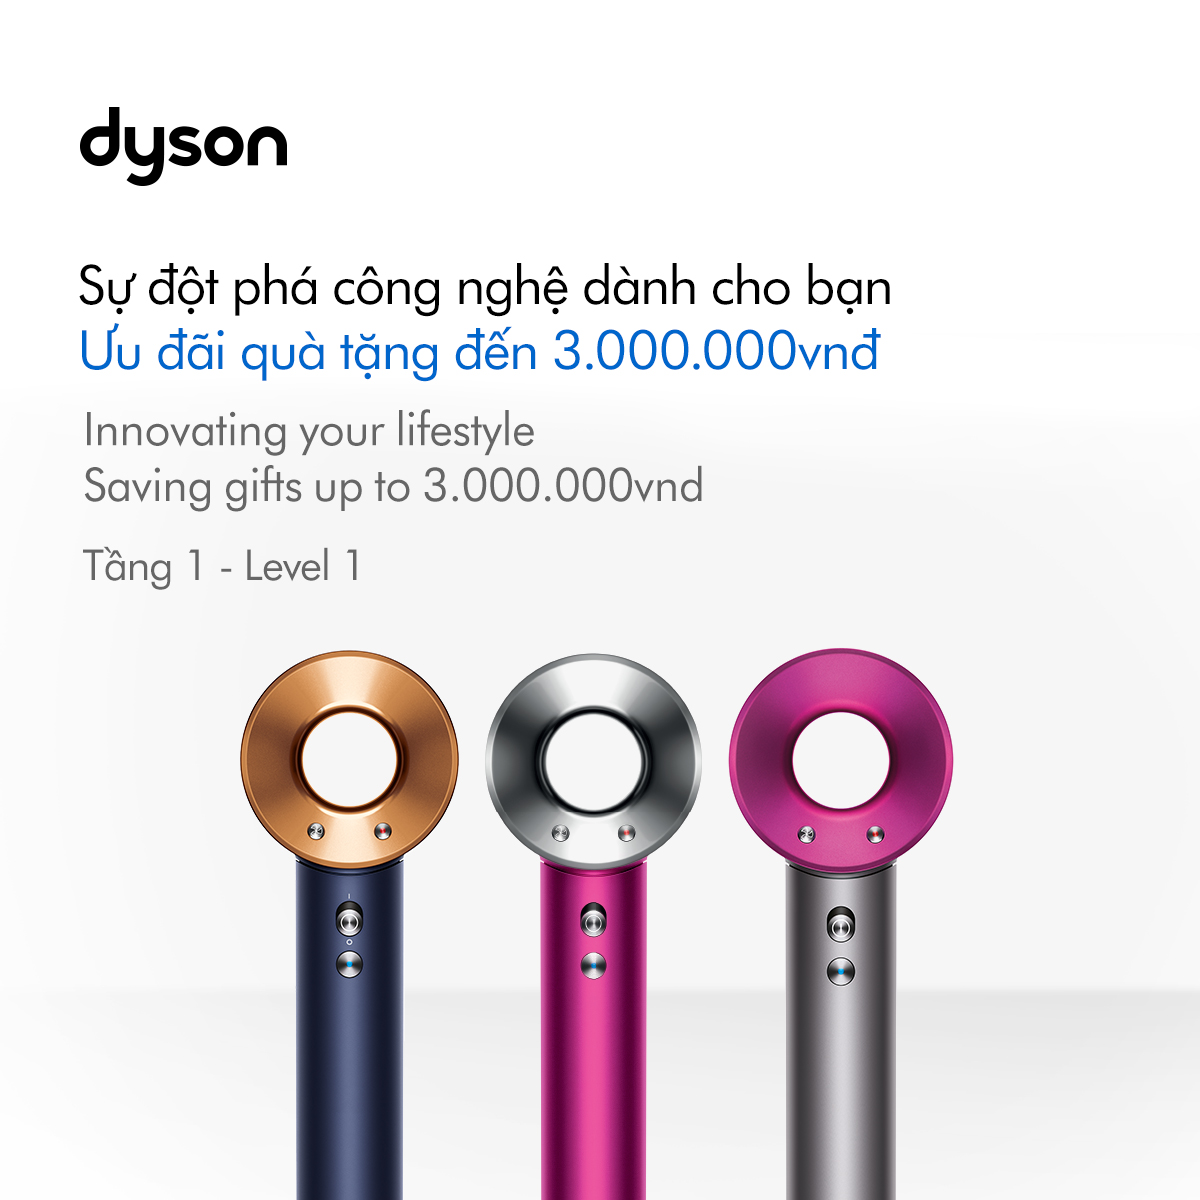 🎉DYSON INNOVATING TECHNOLOGY - SAVING GIFTS UP TO 3,000,000 VND🎉